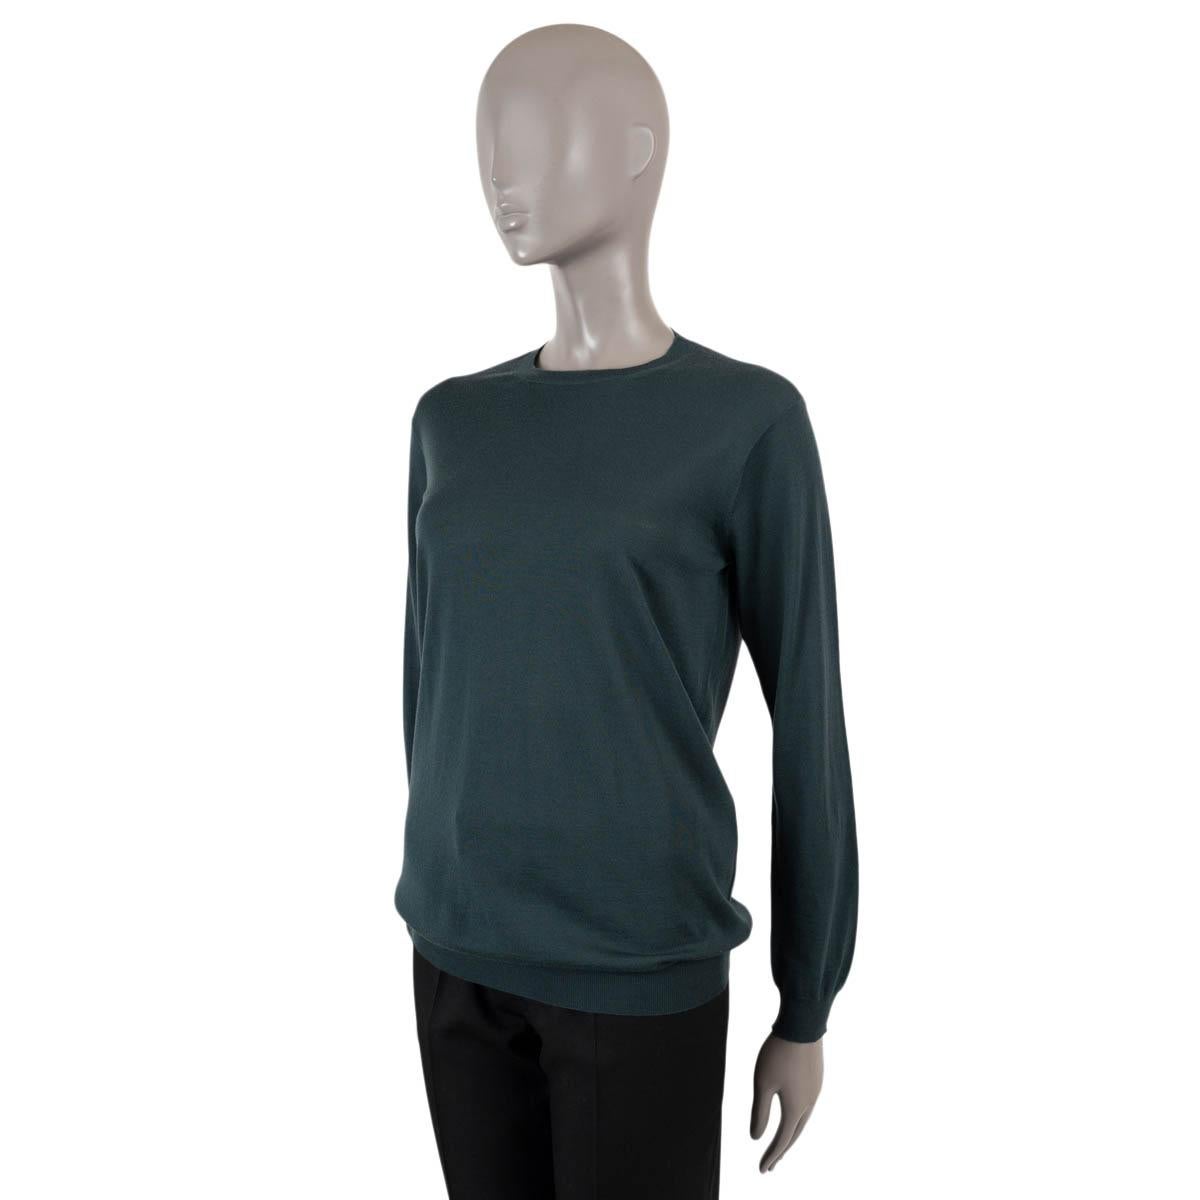 100% authentic Prada classic crewneck sweater in Sacramento green virgin wool (100%).  Has been worn and is in virtually new condition.

Measurements
Tag Size	42
Size	M
Shoulder Width	41cm (16in)
Bust From	94cm (36.7in)
Waist From	92cm (35.9in)
Hips